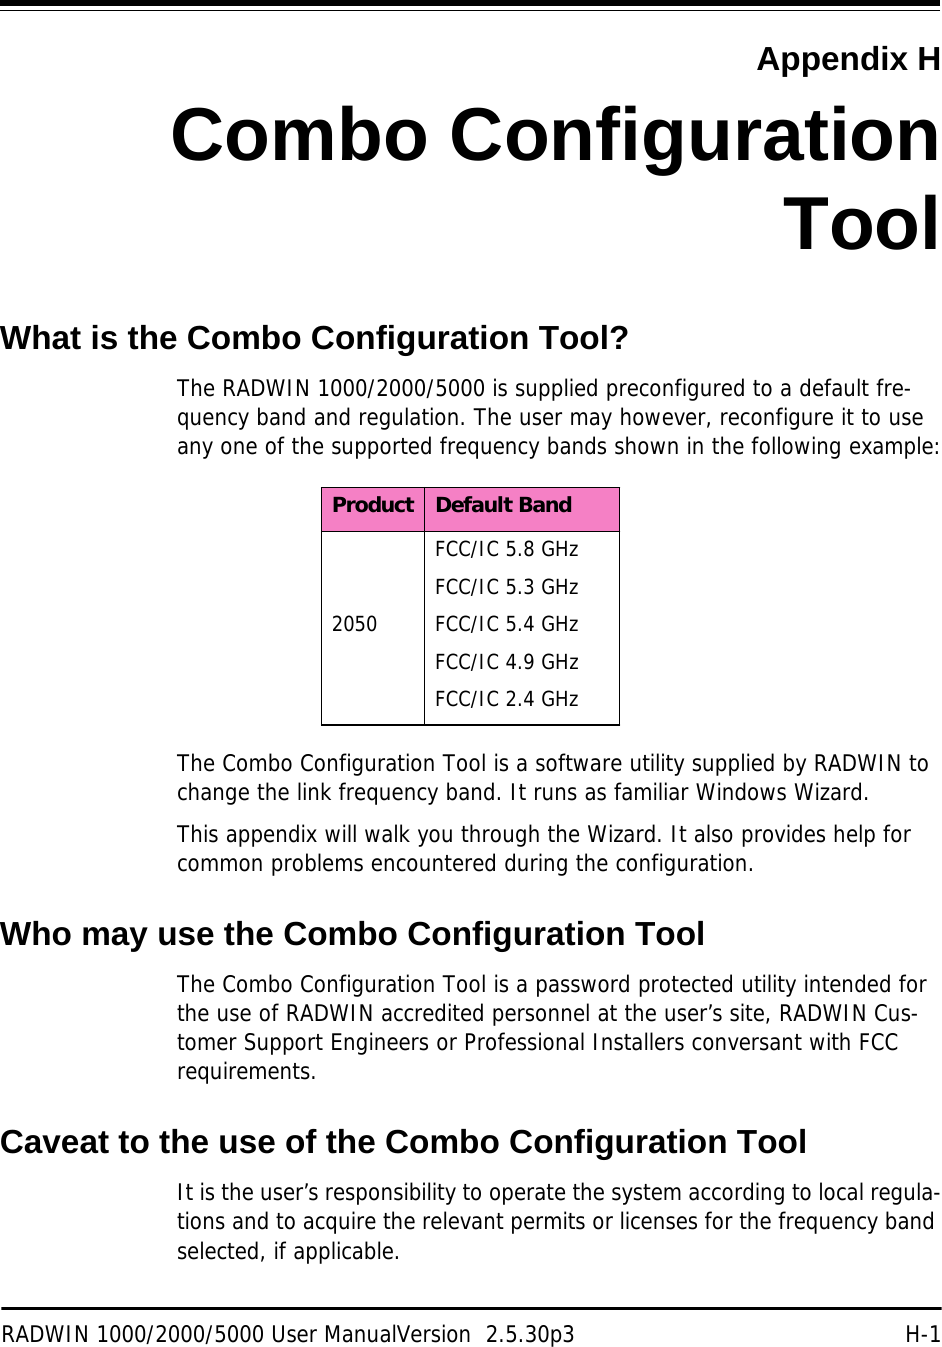 RADWIN 1000/2000/5000 User ManualVersion  2.5.30p3 H-1Appendix HCombo ConfigurationToolWhat is the Combo Configuration Tool?The RADWIN 1000/2000/5000 is supplied preconfigured to a default fre-quency band and regulation. The user may however, reconfigure it to use any one of the supported frequency bands shown in the following example:The Combo Configuration Tool is a software utility supplied by RADWIN to change the link frequency band. It runs as familiar Windows Wizard.This appendix will walk you through the Wizard. It also provides help for common problems encountered during the configuration.Who may use the Combo Configuration ToolThe Combo Configuration Tool is a password protected utility intended for the use of RADWIN accredited personnel at the user’s site, RADWIN Cus-tomer Support Engineers or Professional Installers conversant with FCC requirements.Caveat to the use of the Combo Configuration ToolIt is the user’s responsibility to operate the system according to local regula-tions and to acquire the relevant permits or licenses for the frequency band selected, if applicable.Product Default Band2050FCC/IC 5.8 GHzFCC/IC 5.3 GHzFCC/IC 5.4 GHzFCC/IC 4.9 GHzFCC/IC 2.4 GHz